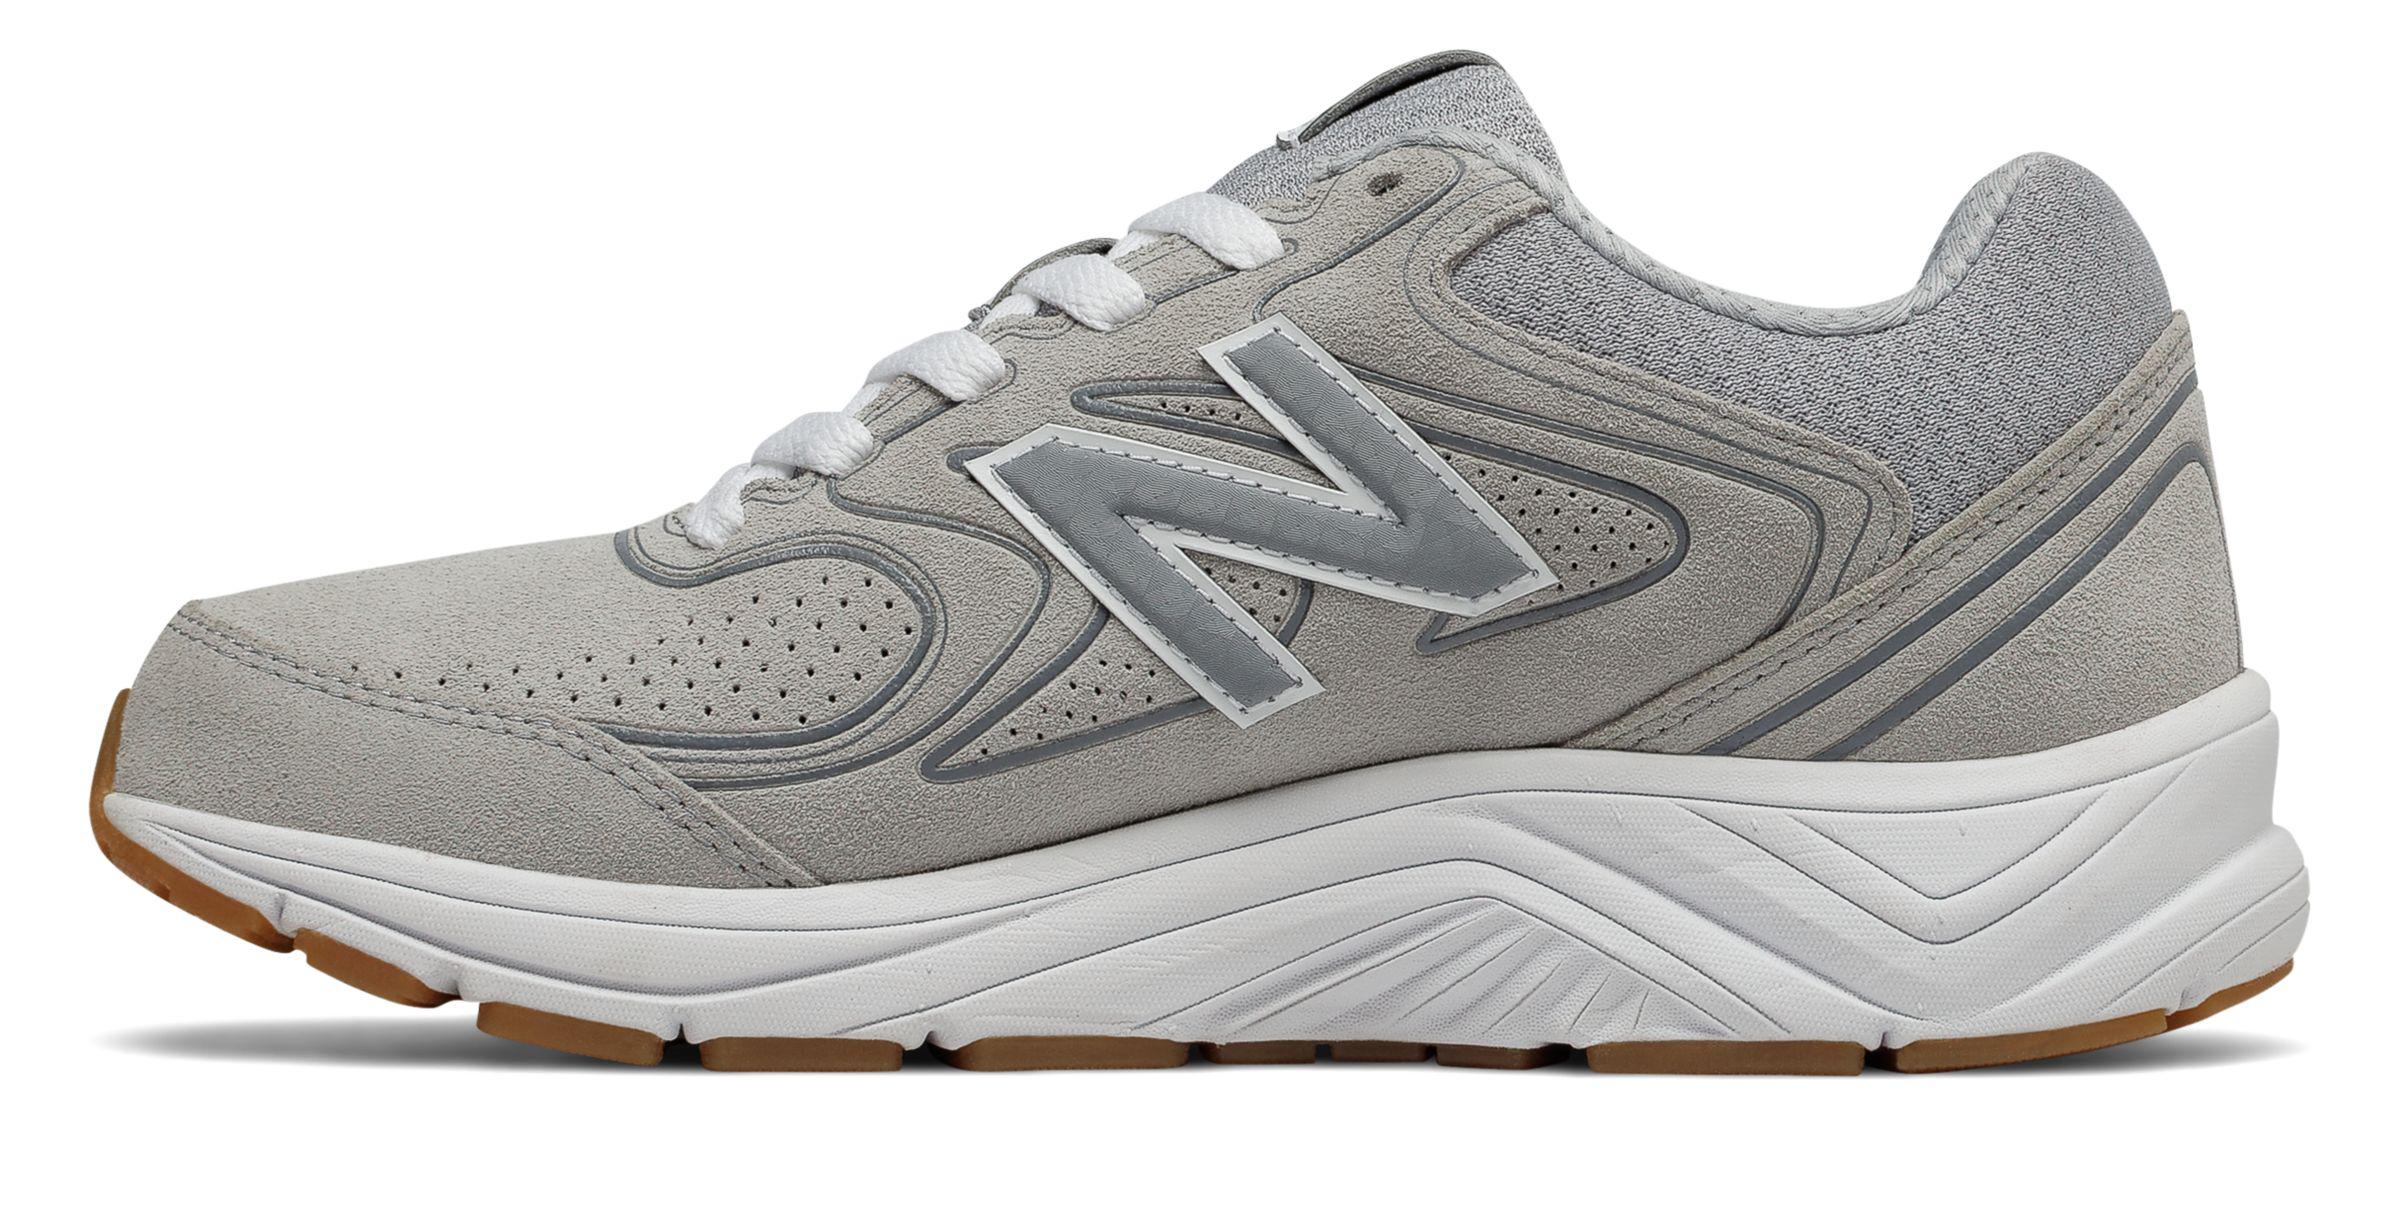 New Balance Suede 840v2 in Gray - Lyst